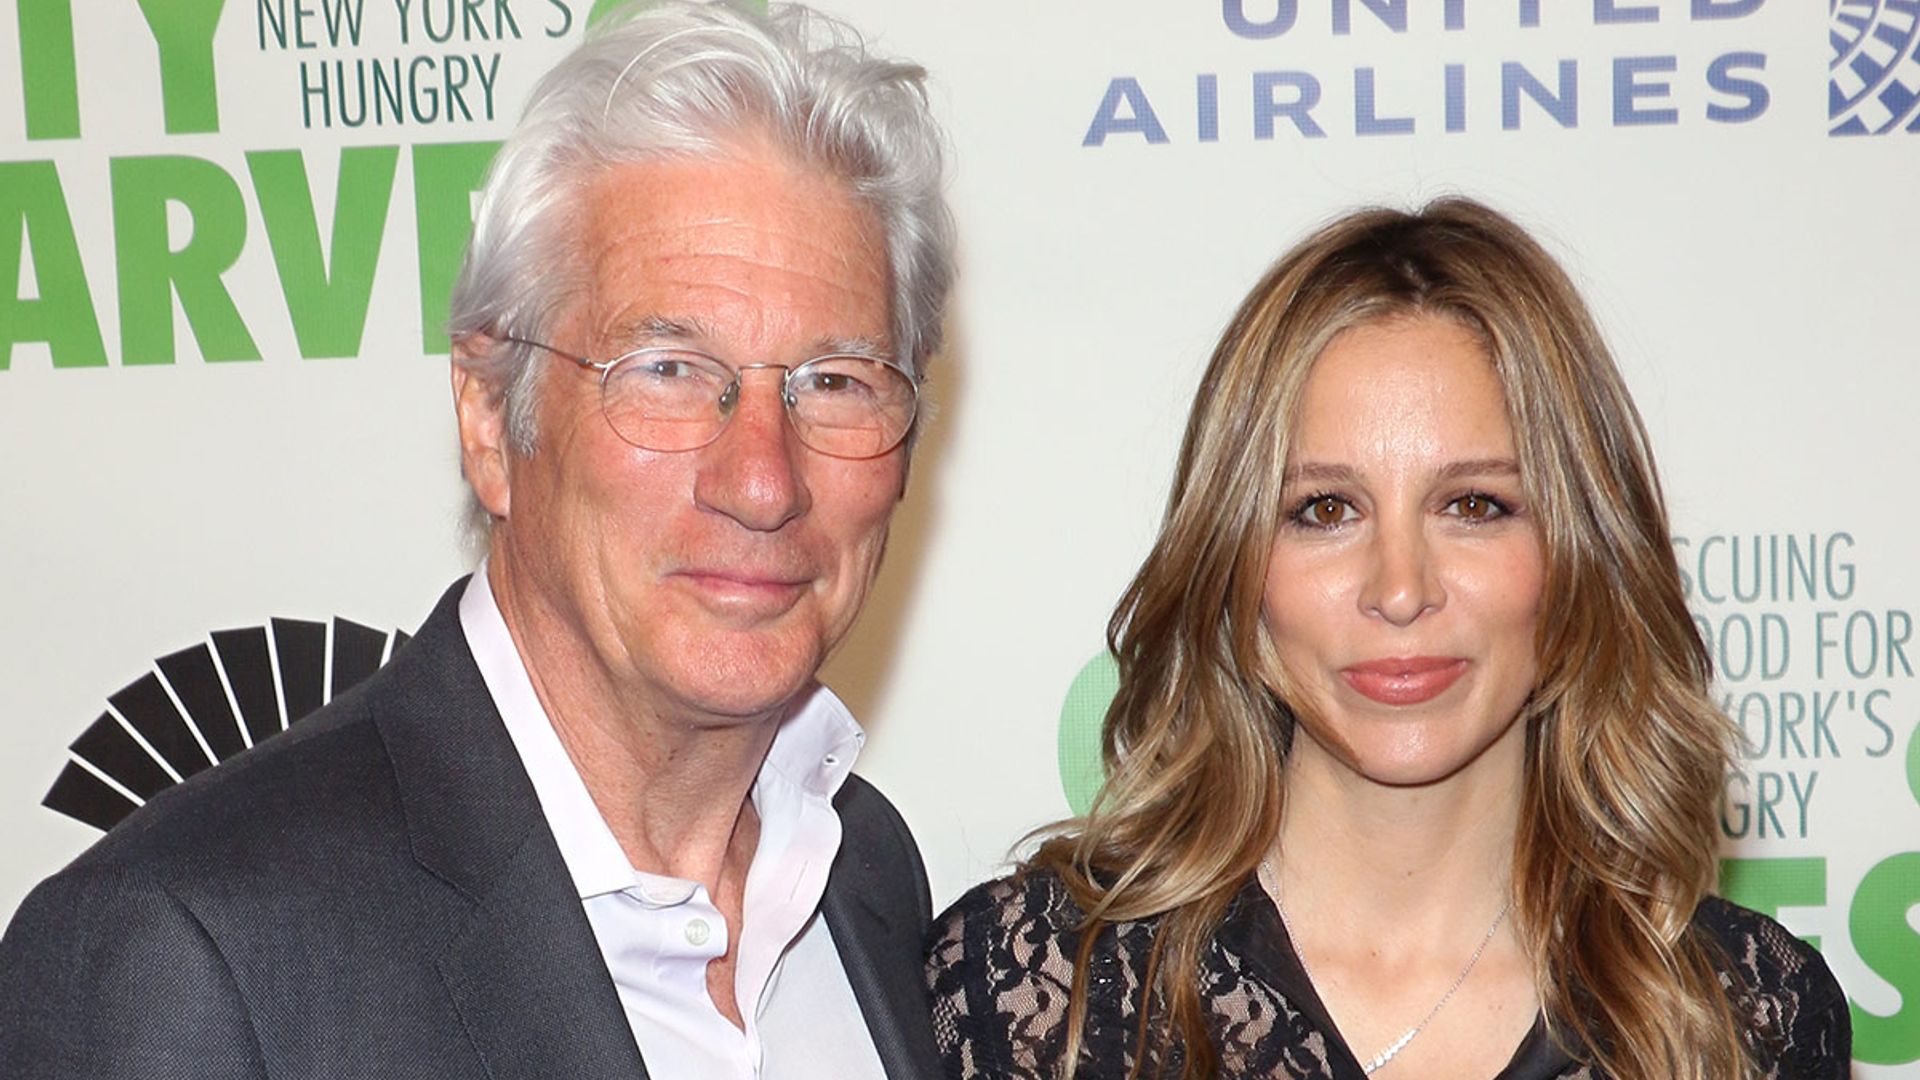 Richard Gere and wife Alejandra expecting second baby 9 months after birth  of son | HELLO!